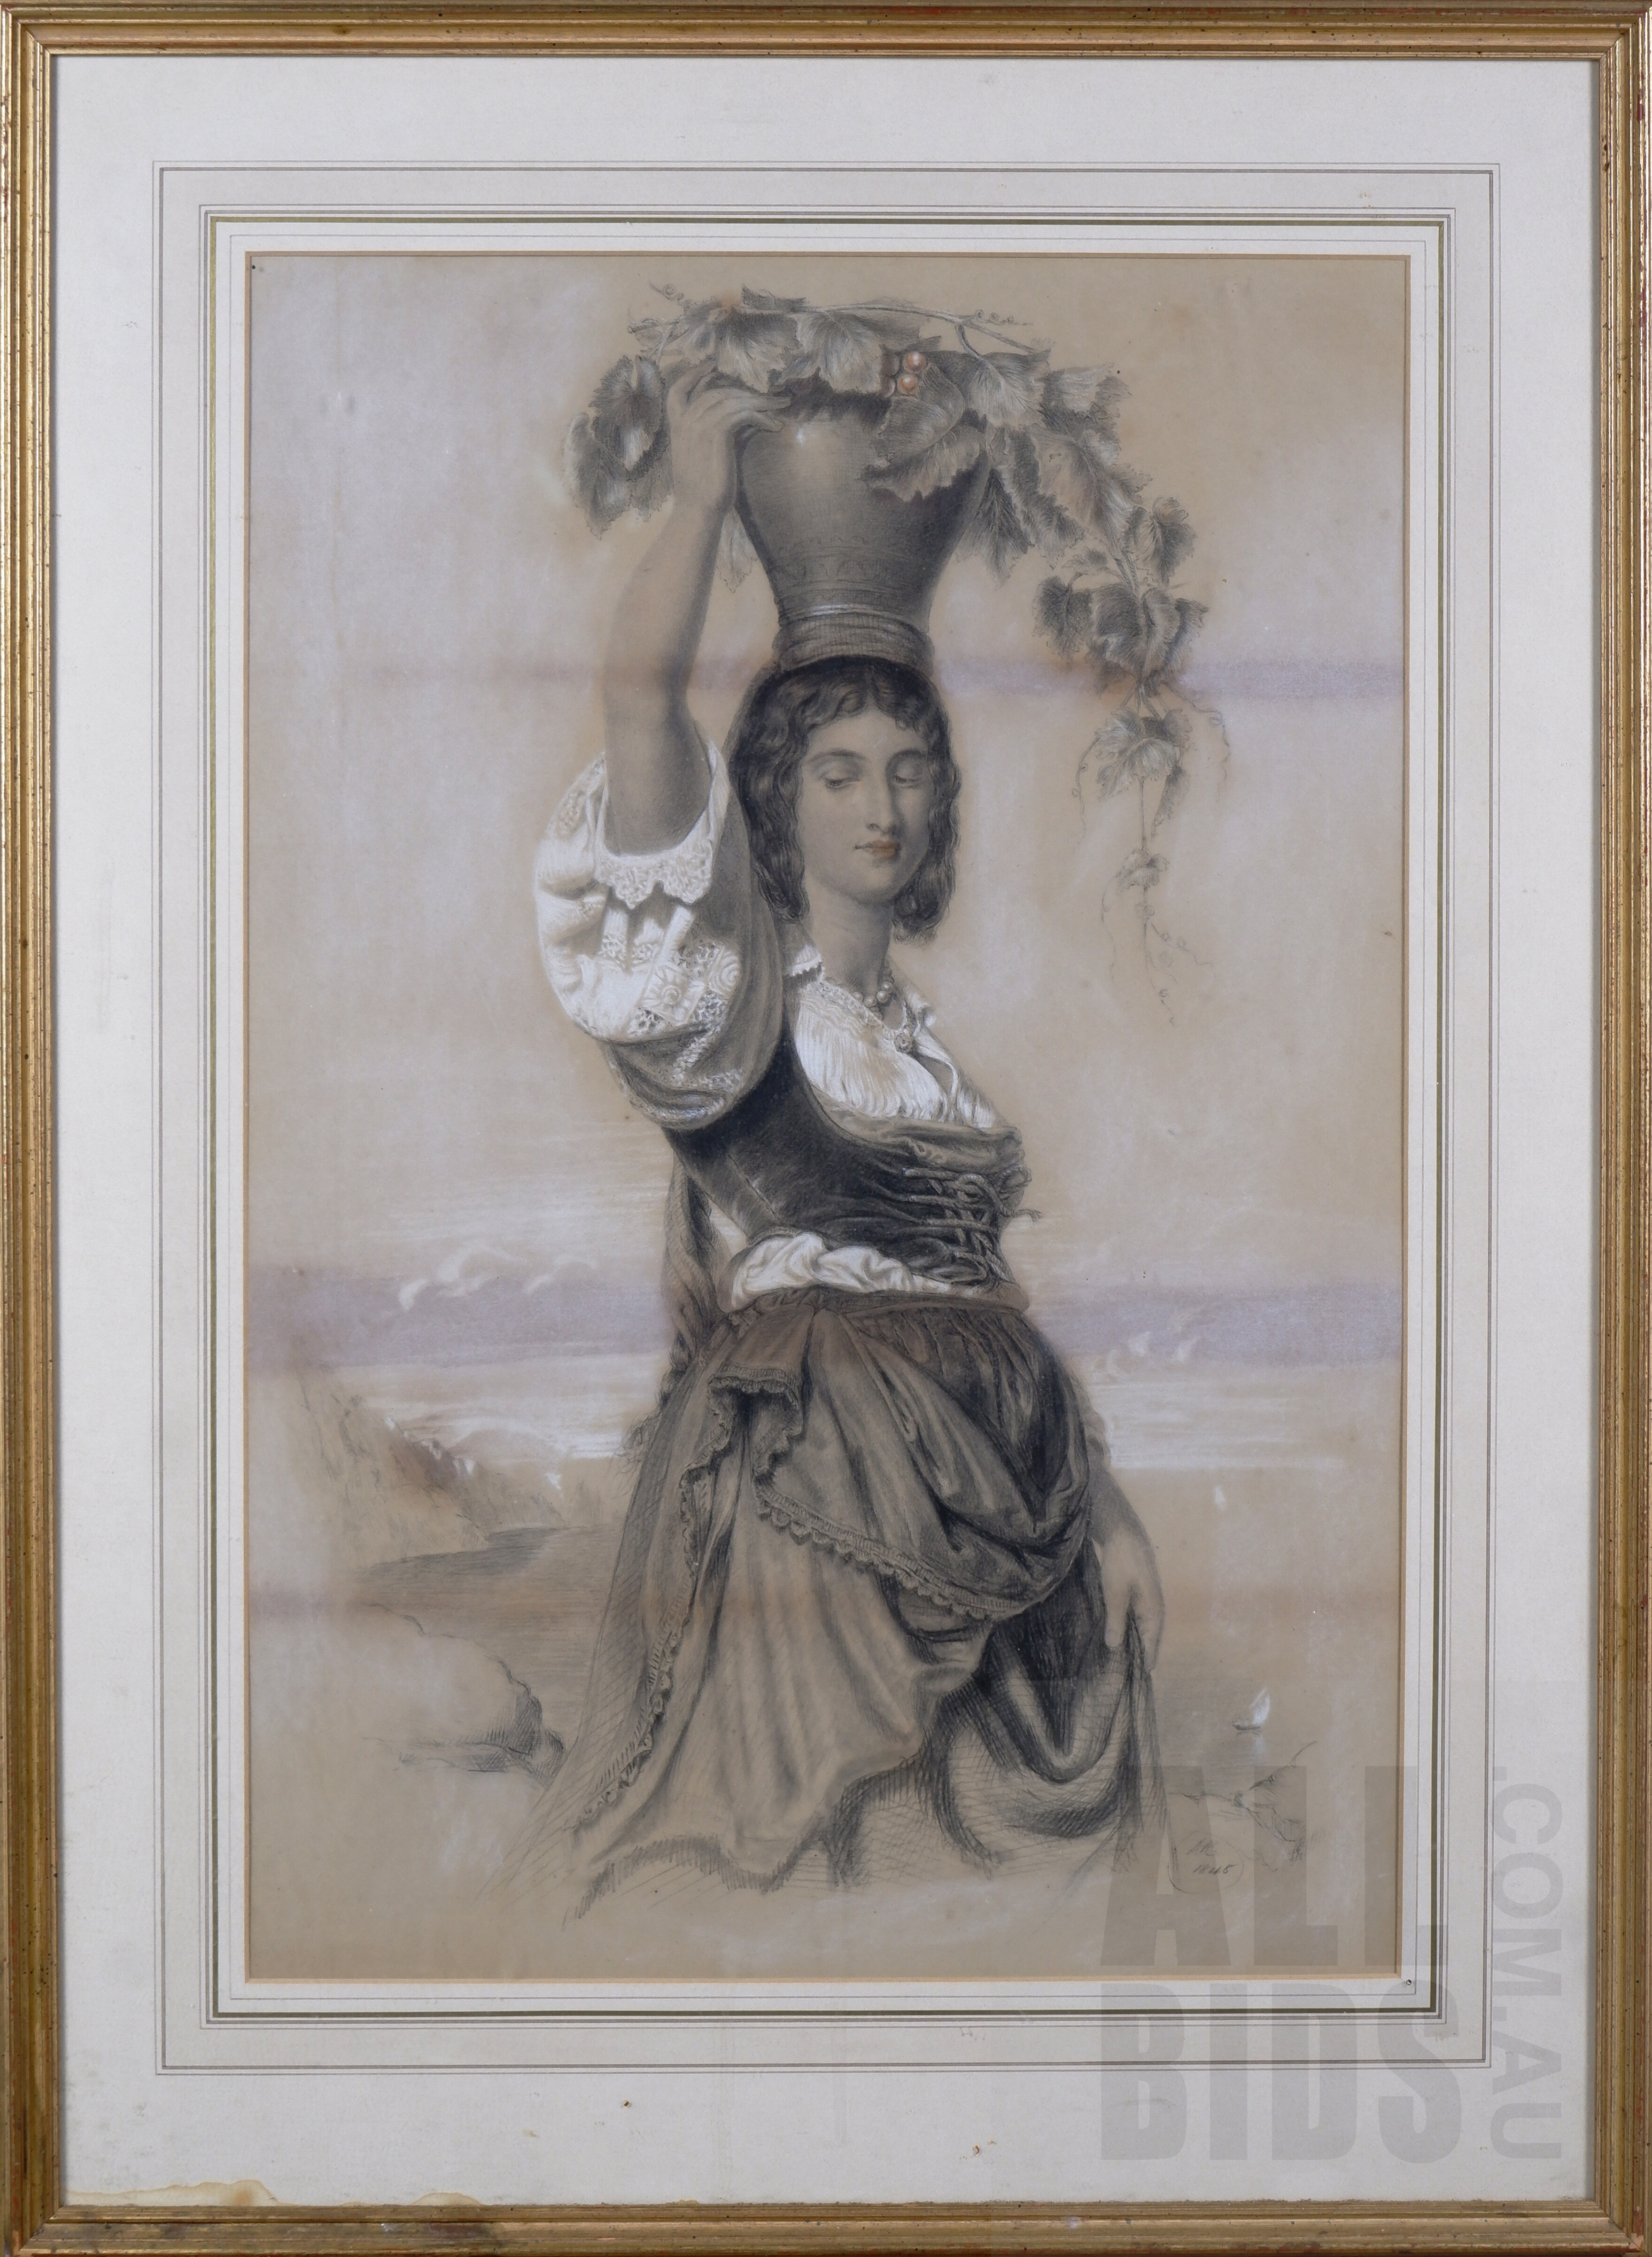 'After George Richmond, An Italian Girl 1846, Black and White Chalks with Bodycolour, 63.5 x 43 cm'